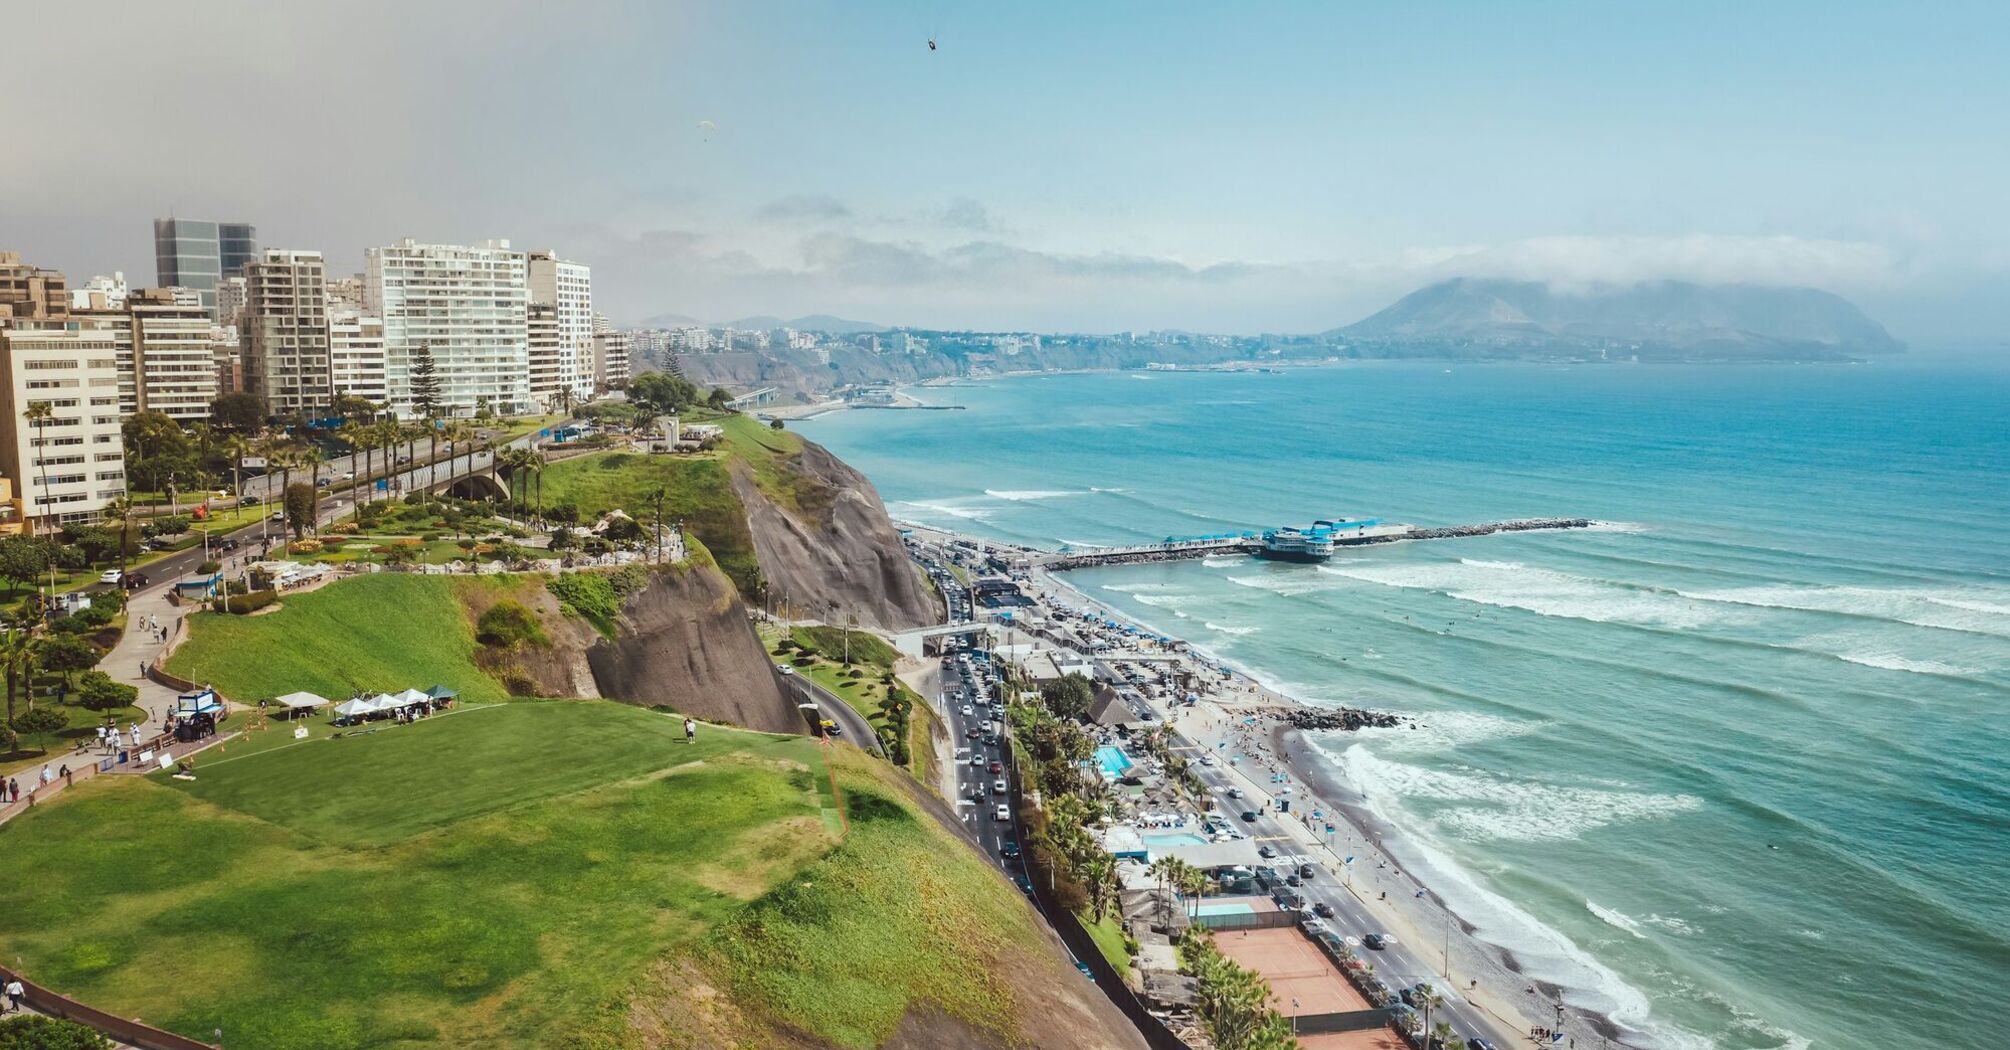 Aerial view of Lima, Peru, showcasing the coastline with a bustling beachfront, cliffs, and a modern cityscape in the background